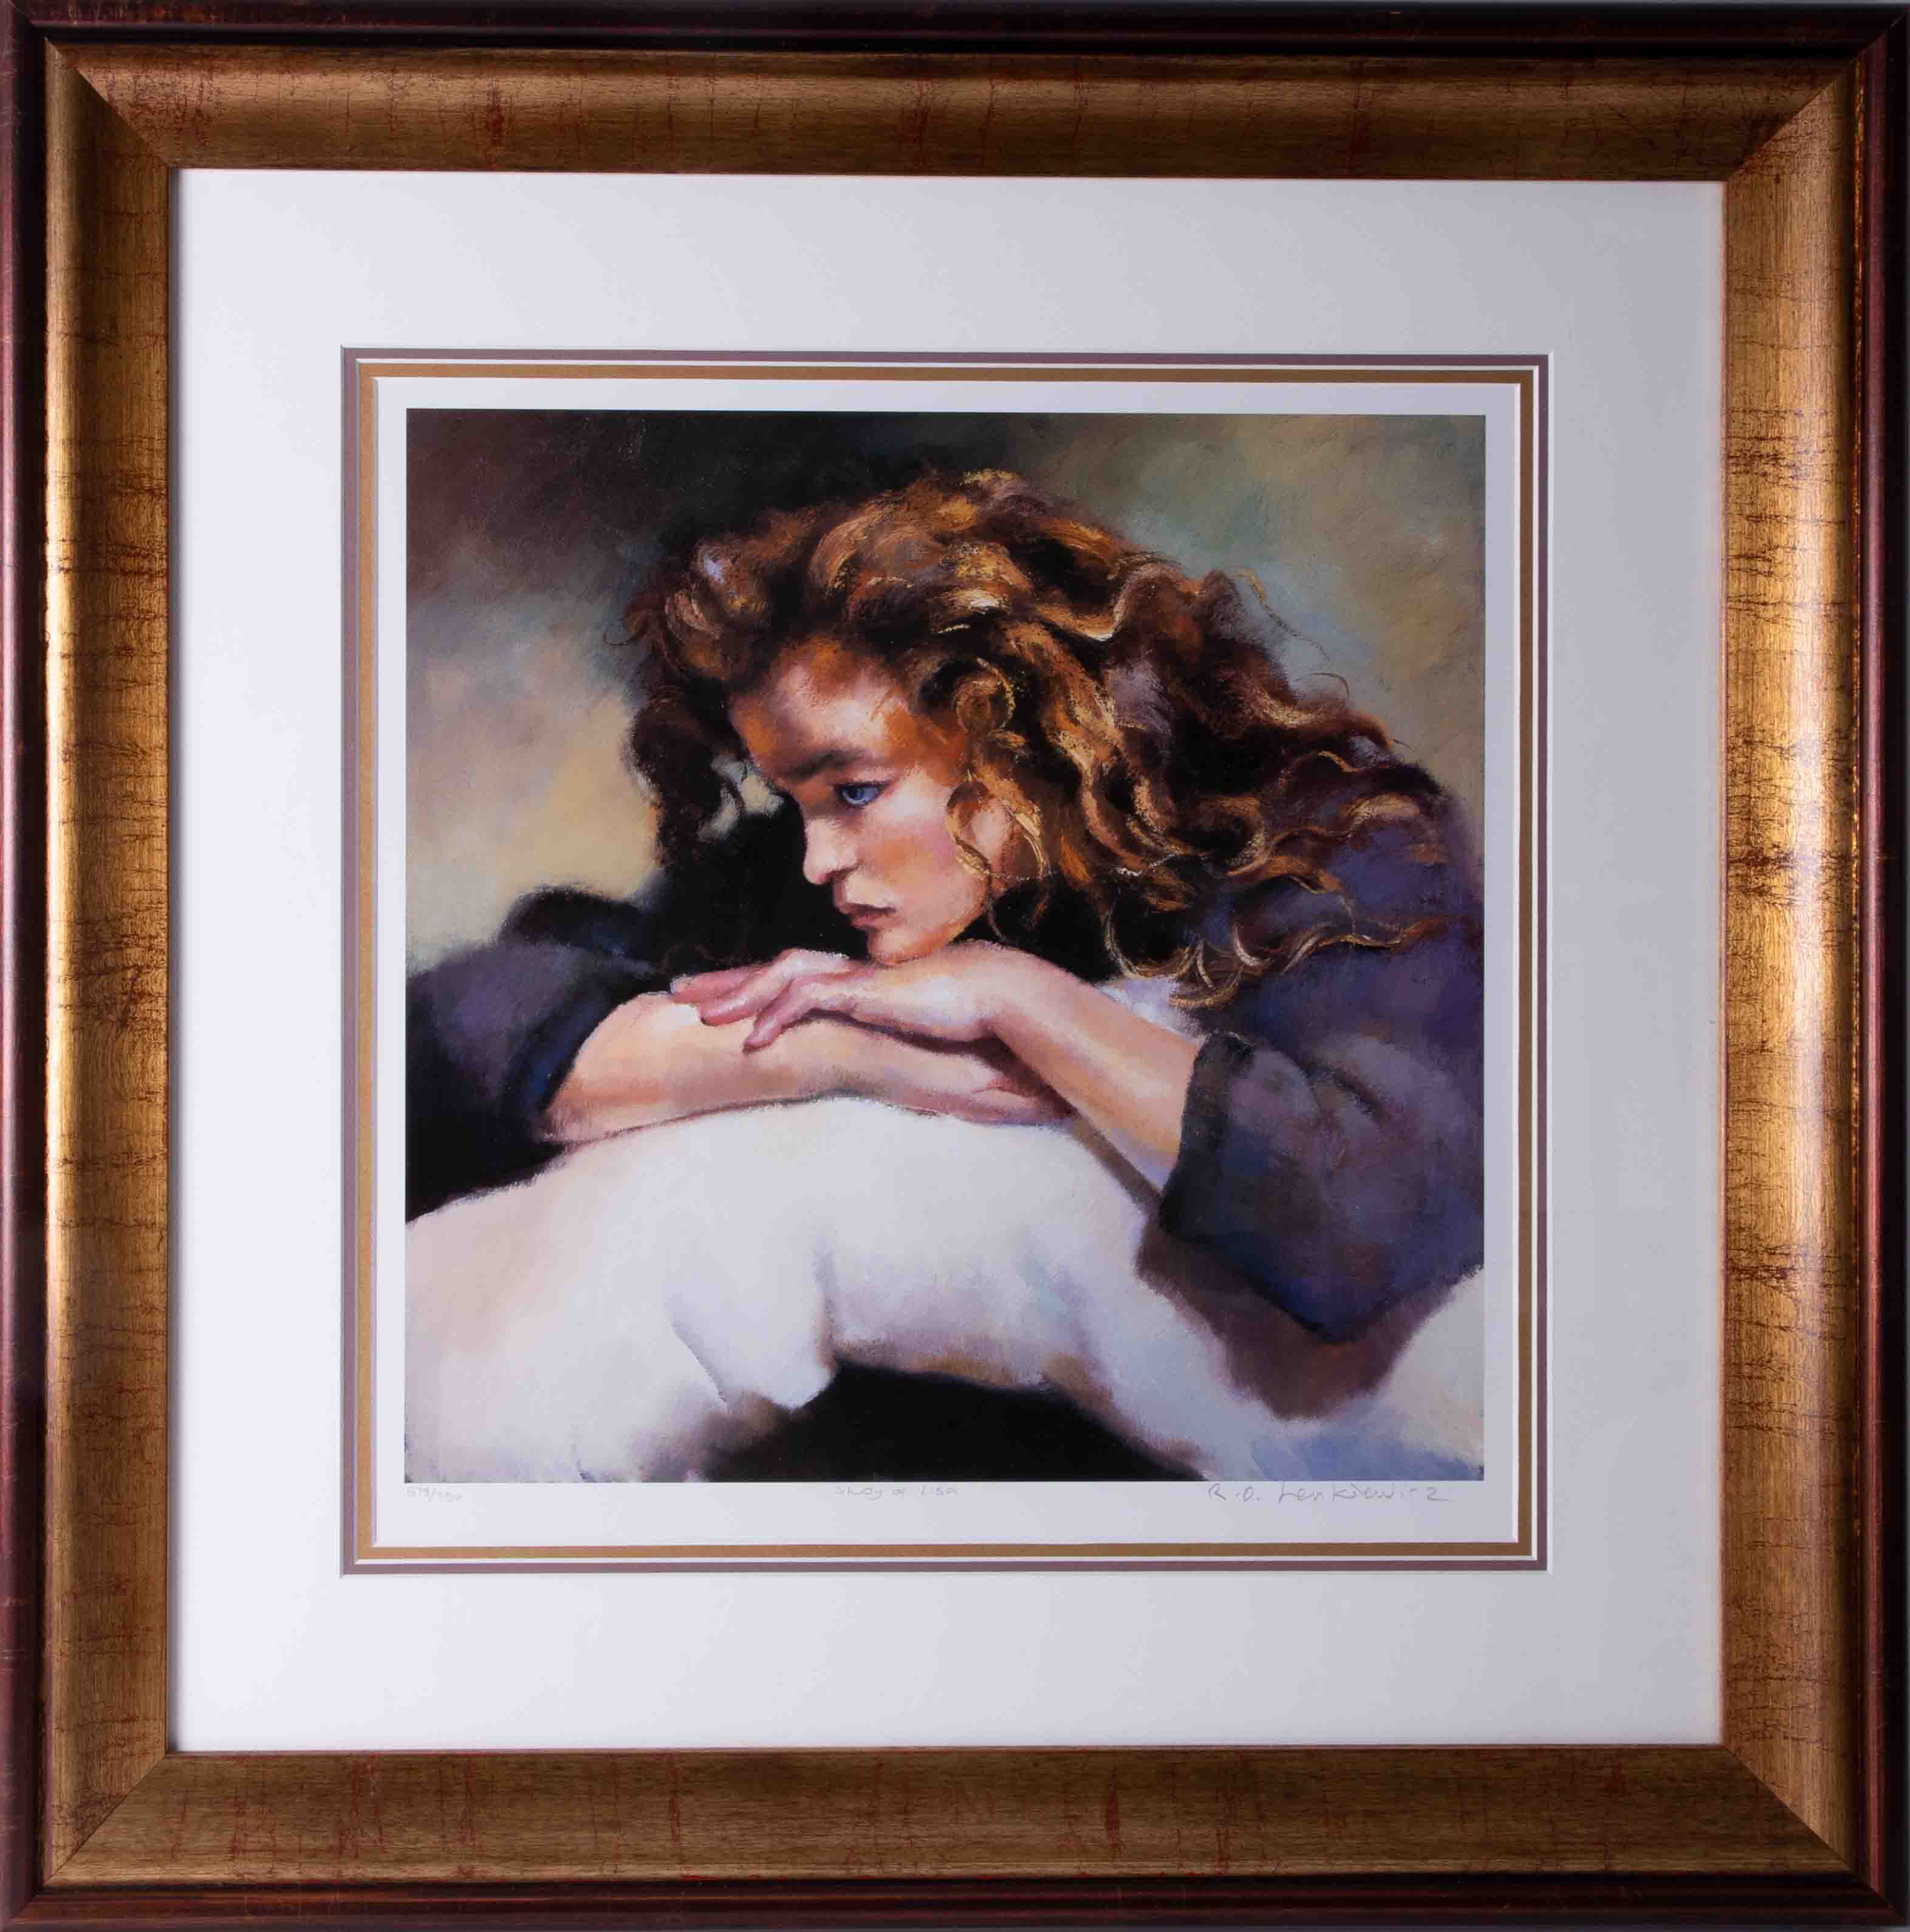 Robert Lenkiewicz, 'Study of Lisa', signed limited edition print 578/750, 37cm x 37cm, framed and